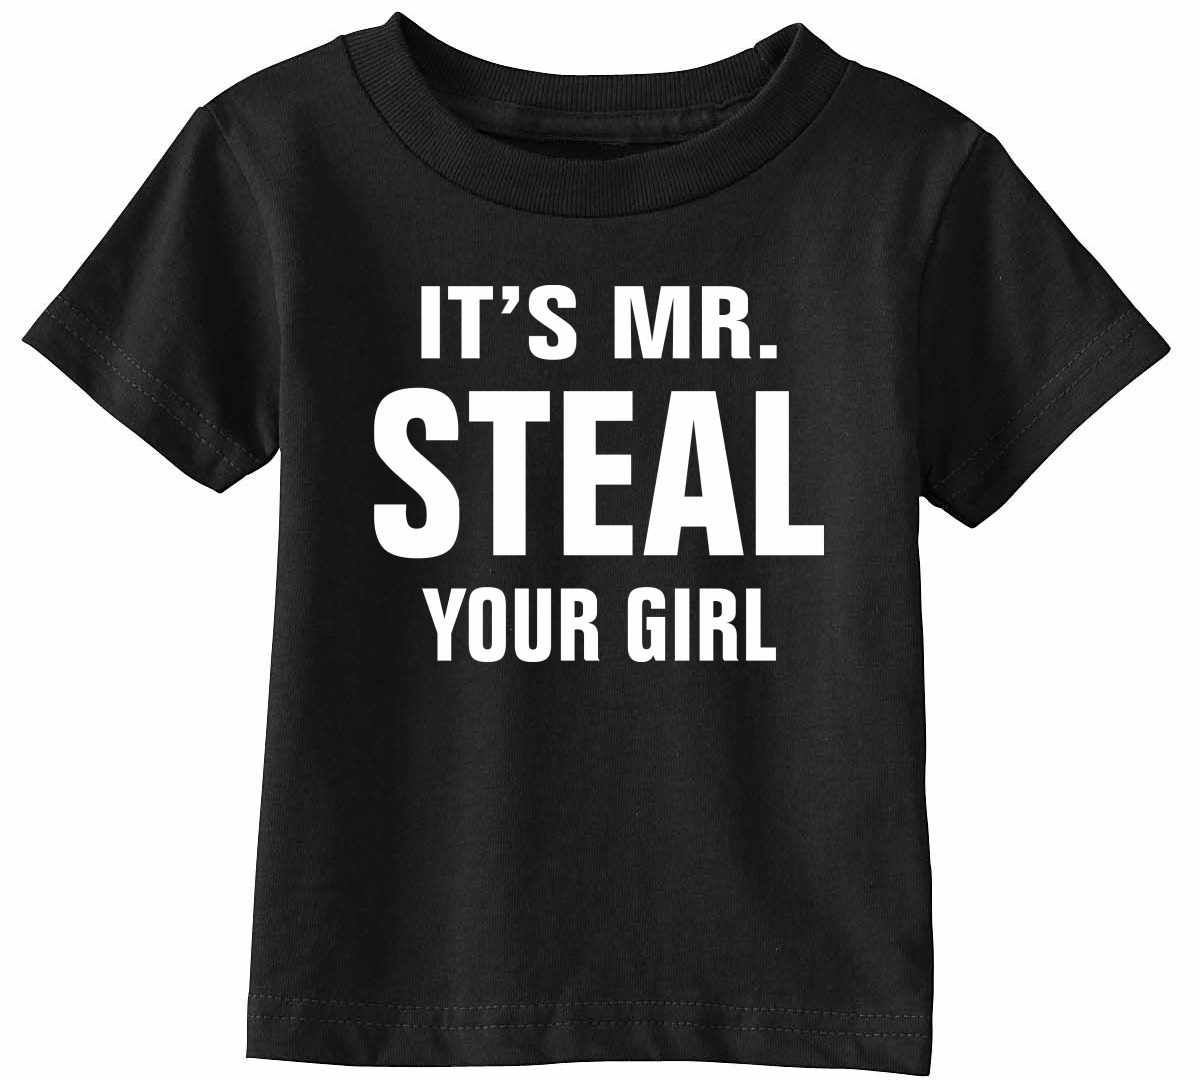 IT'S MR. STEAL YOUR GIRL Infant/Toddler 